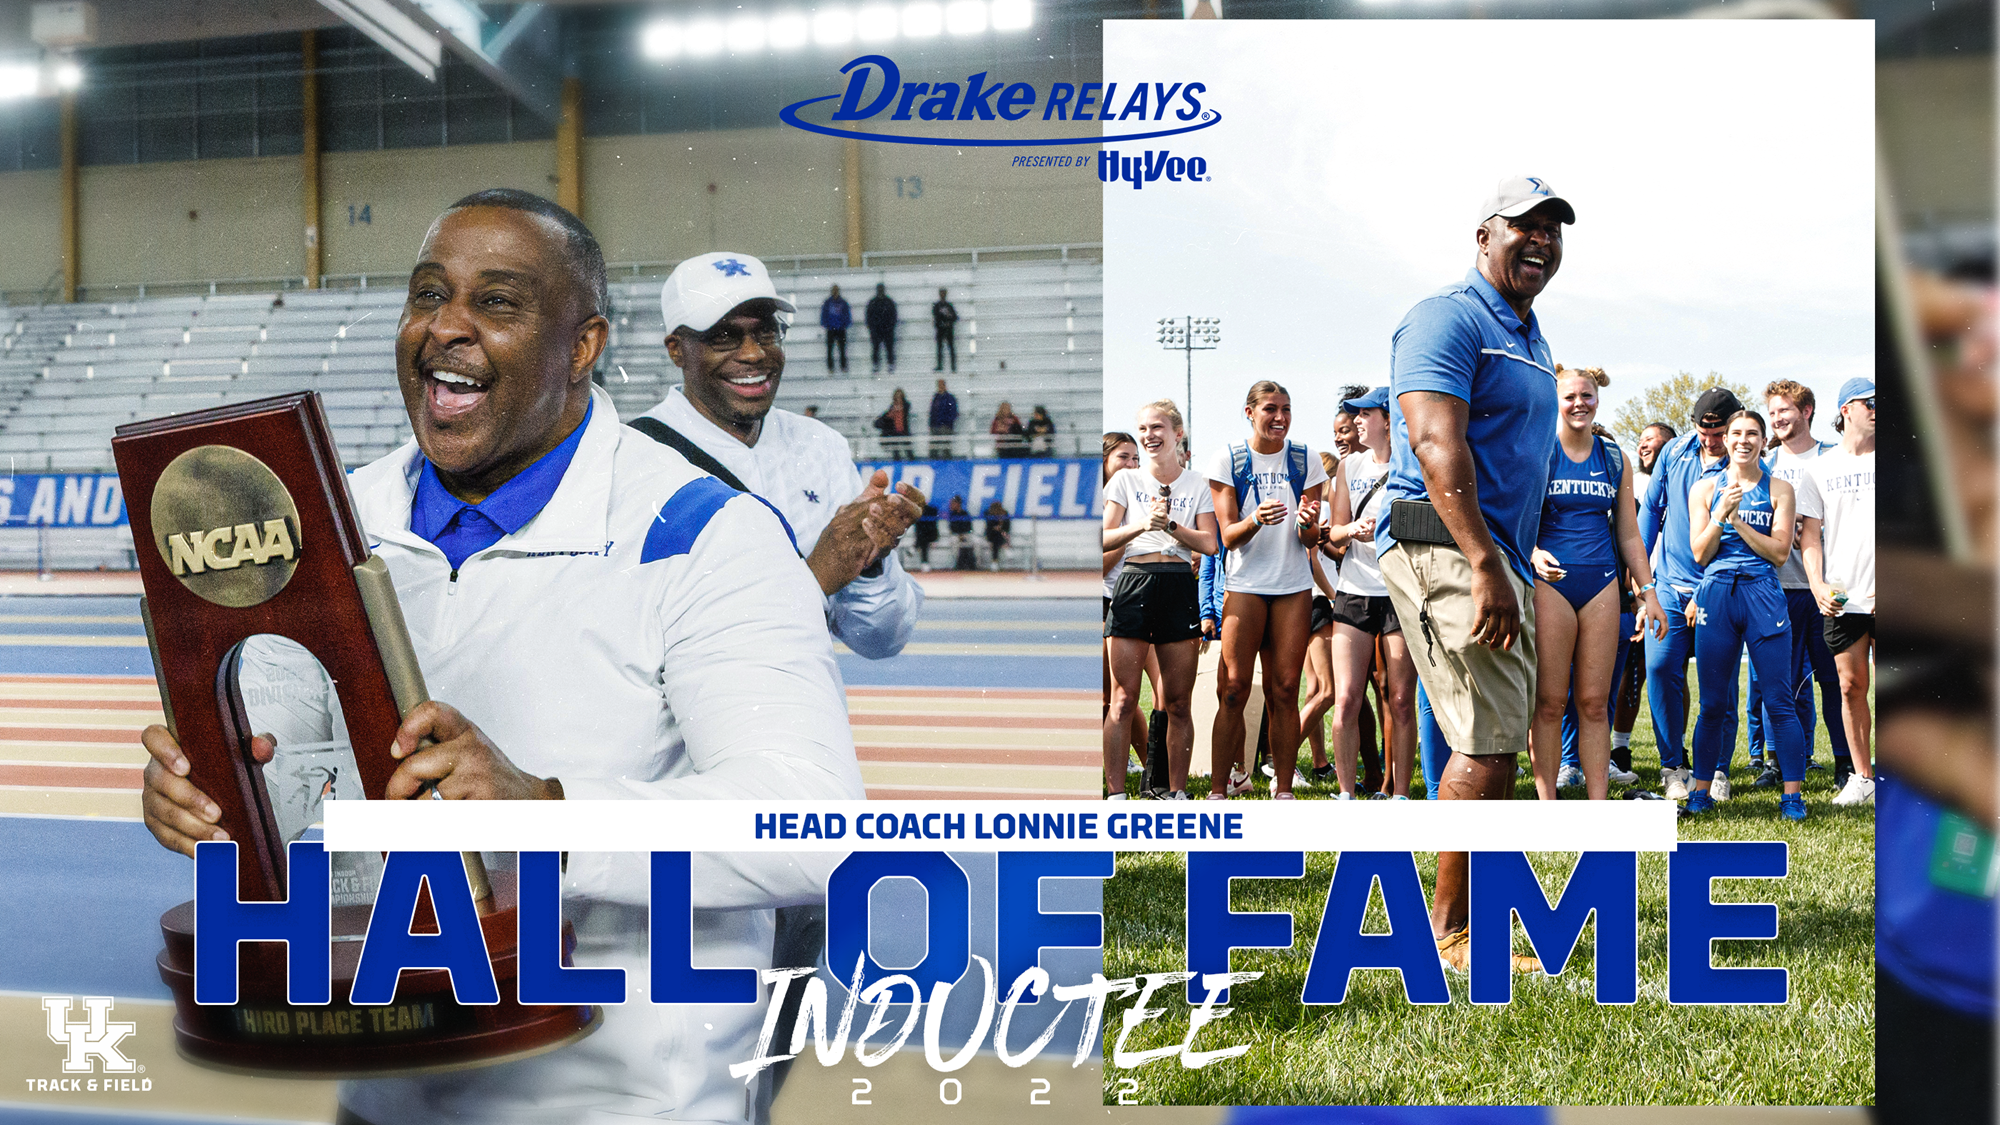 UKTF Head Coach Lonnie Greene to be Inducted into Drake Relays Hall of Fame